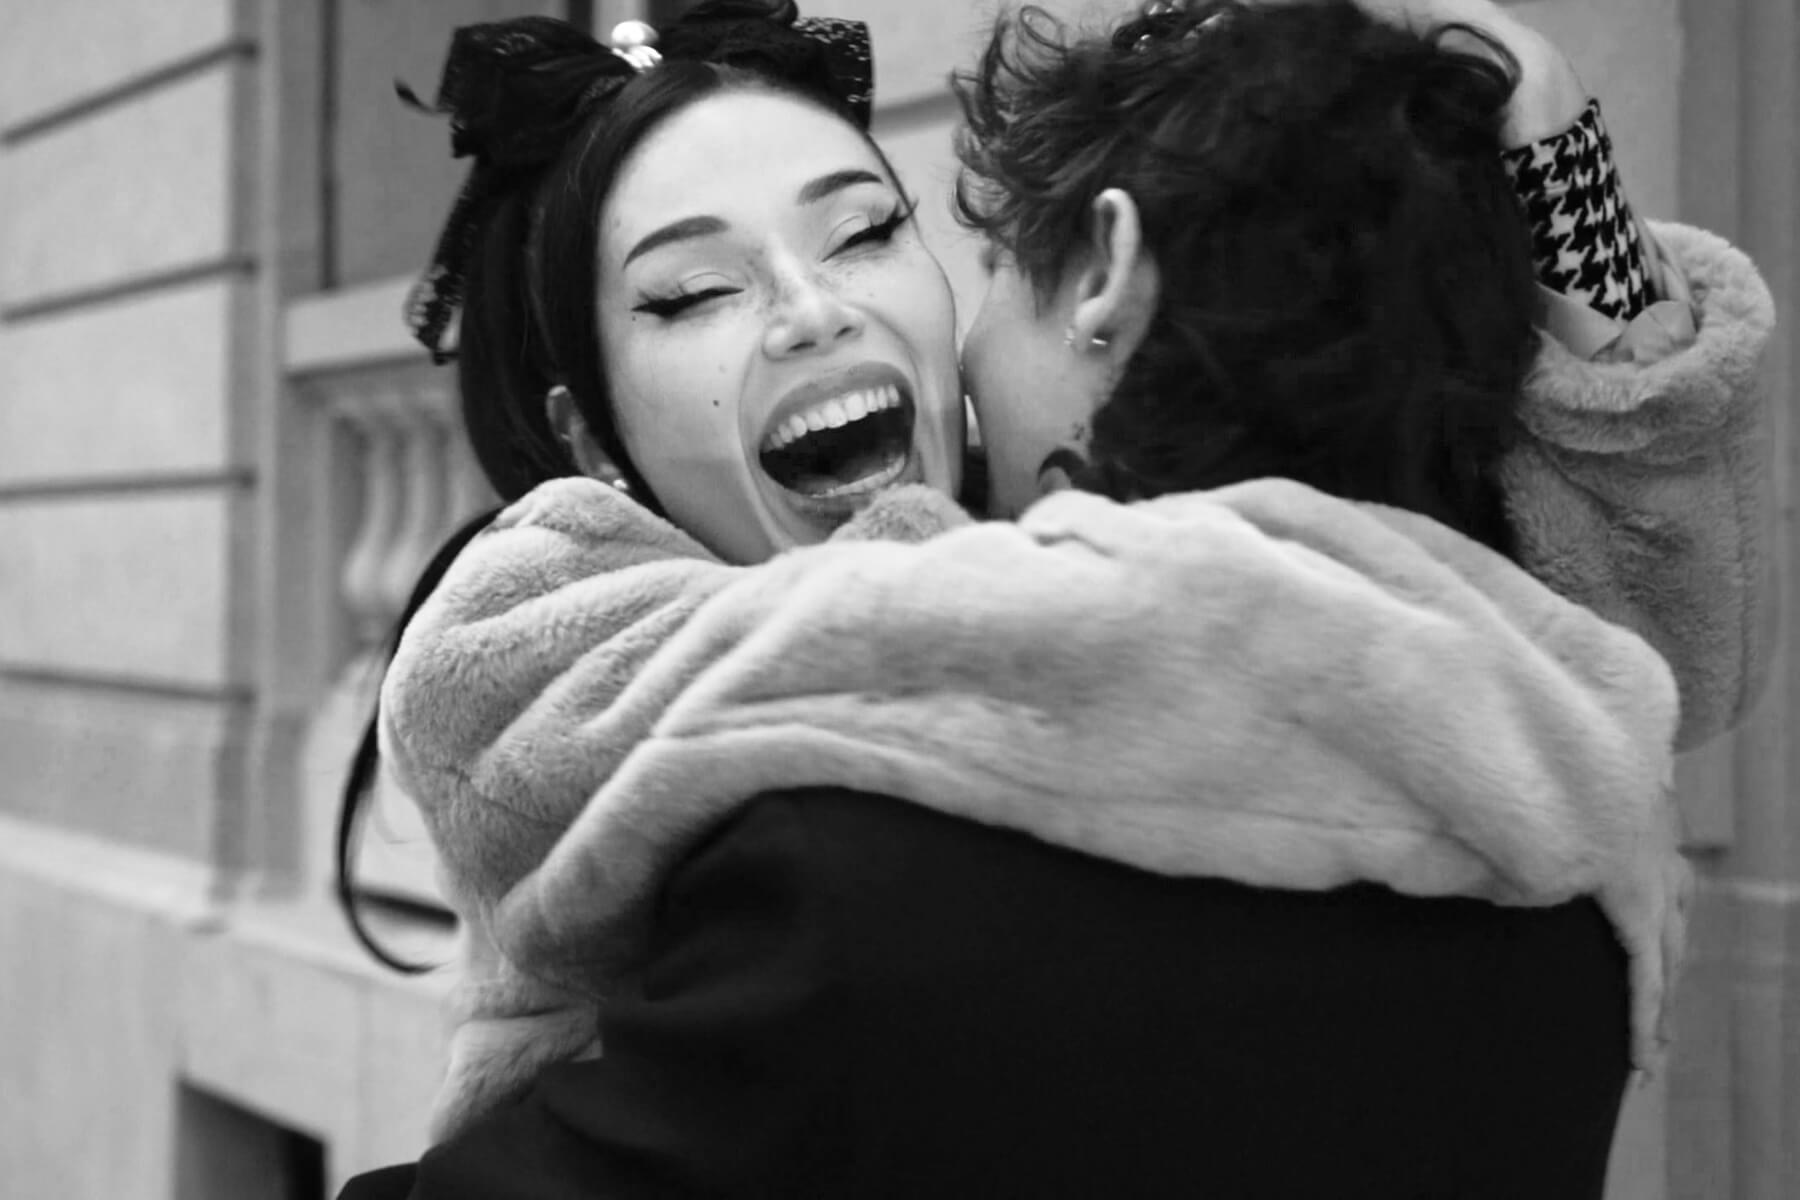 A candid black-and-white photo beautifully captures a woman joyfully embracing her partner in a burst of happiness, moments after his romantic marriage proposal.